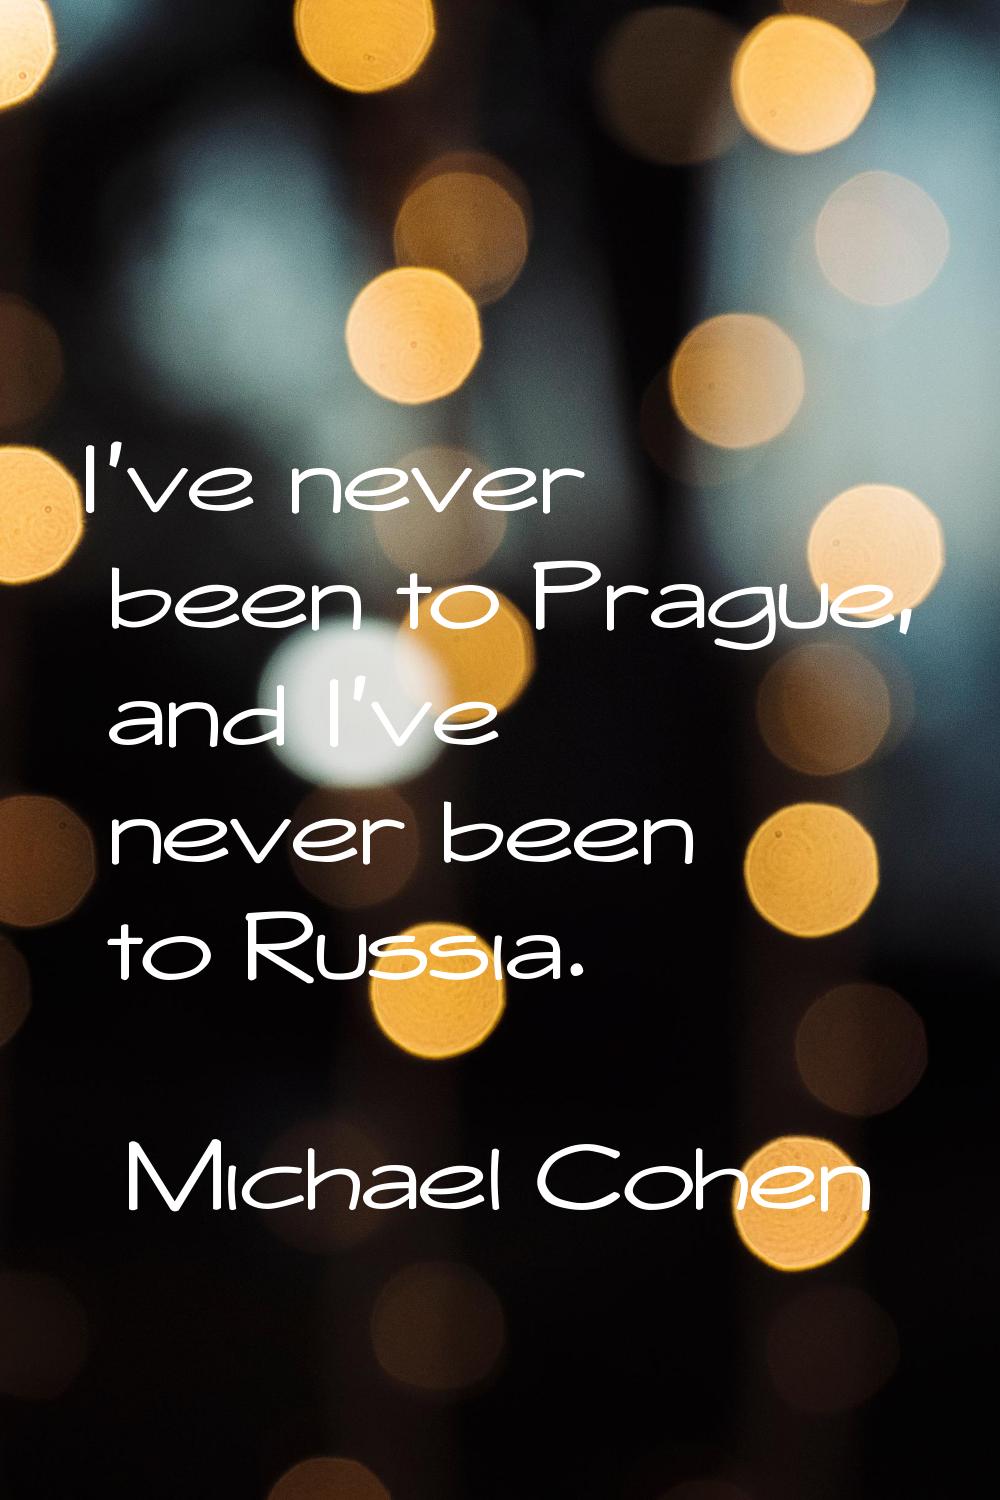 I've never been to Prague, and I've never been to Russia.